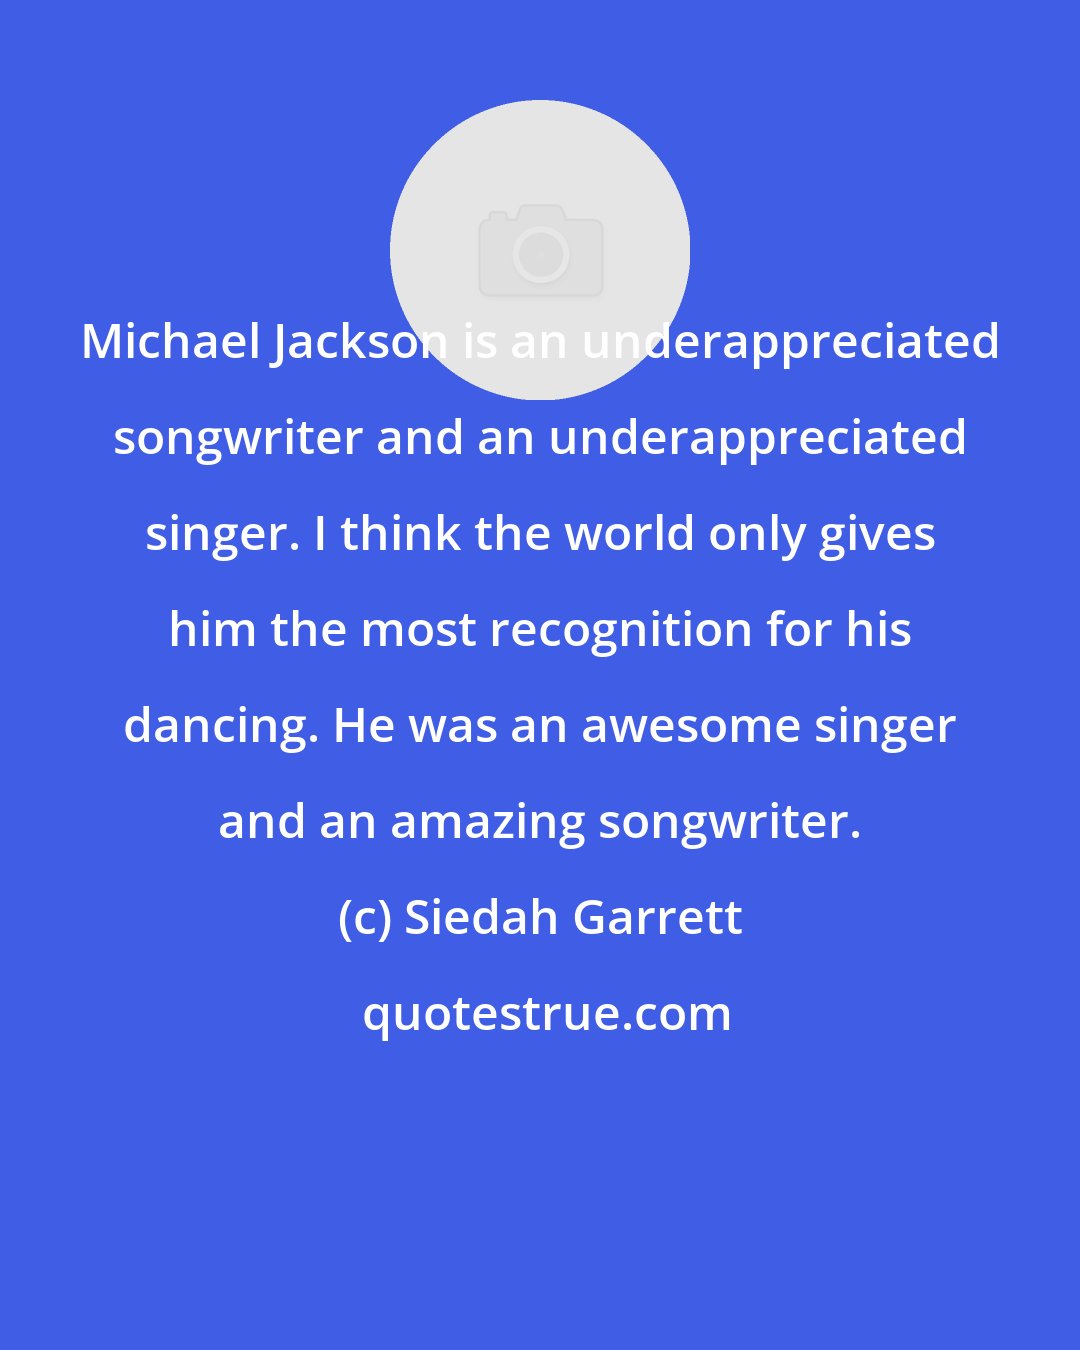 Siedah Garrett: Michael Jackson is an underappreciated songwriter and an underappreciated singer. I think the world only gives him the most recognition for his dancing. He was an awesome singer and an amazing songwriter.